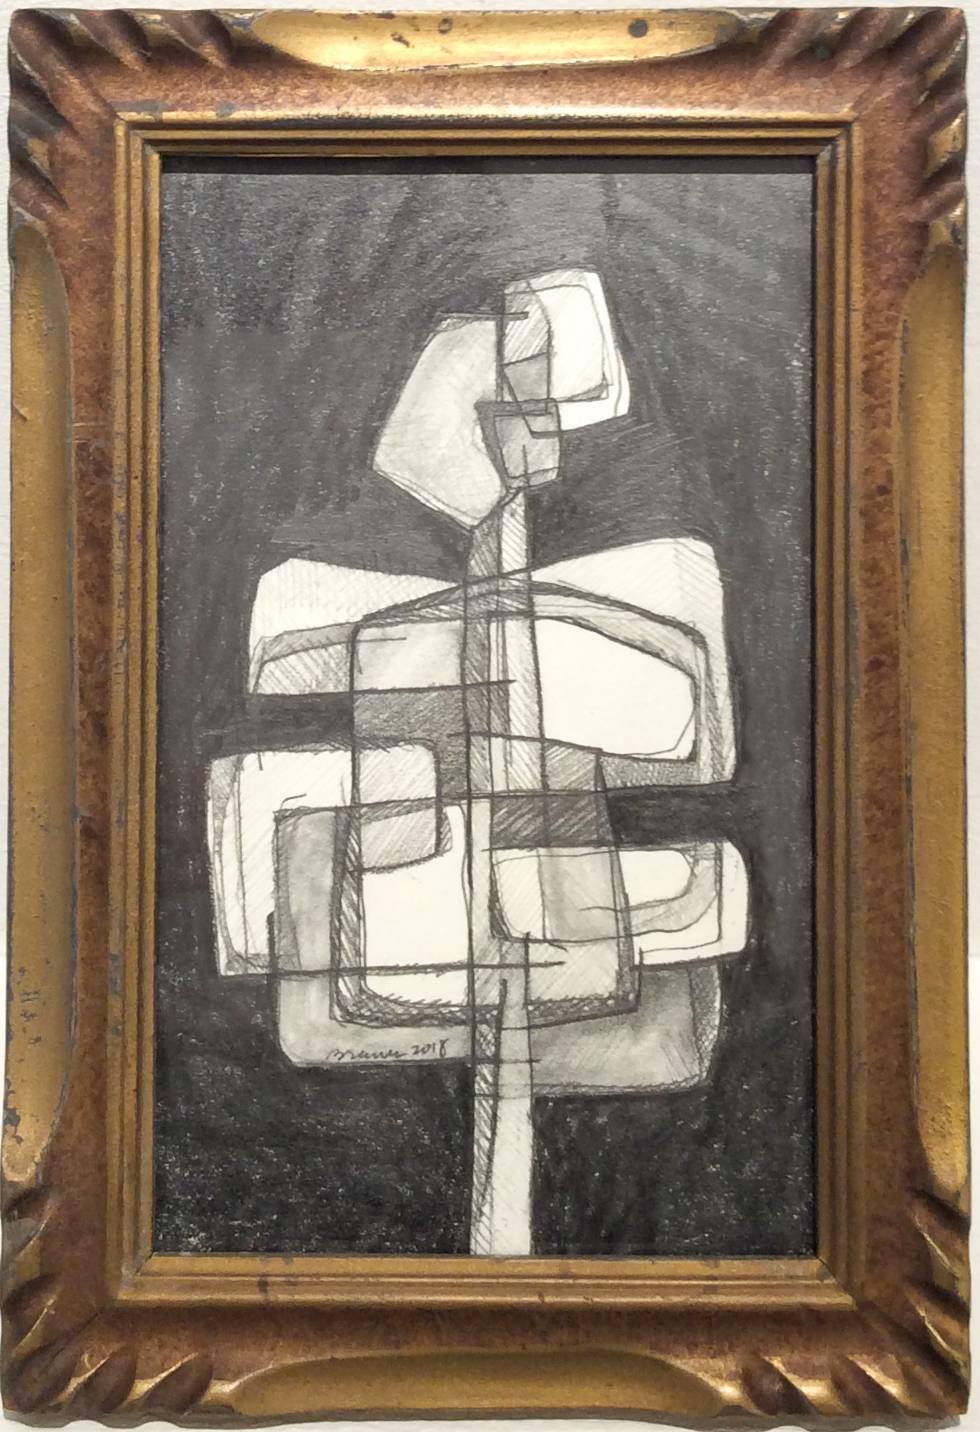 David Dew Bruner Abstract Drawing - Infanta XLV (Small Abstract Figurative Graphite Drawing in Antique Wood Frame)